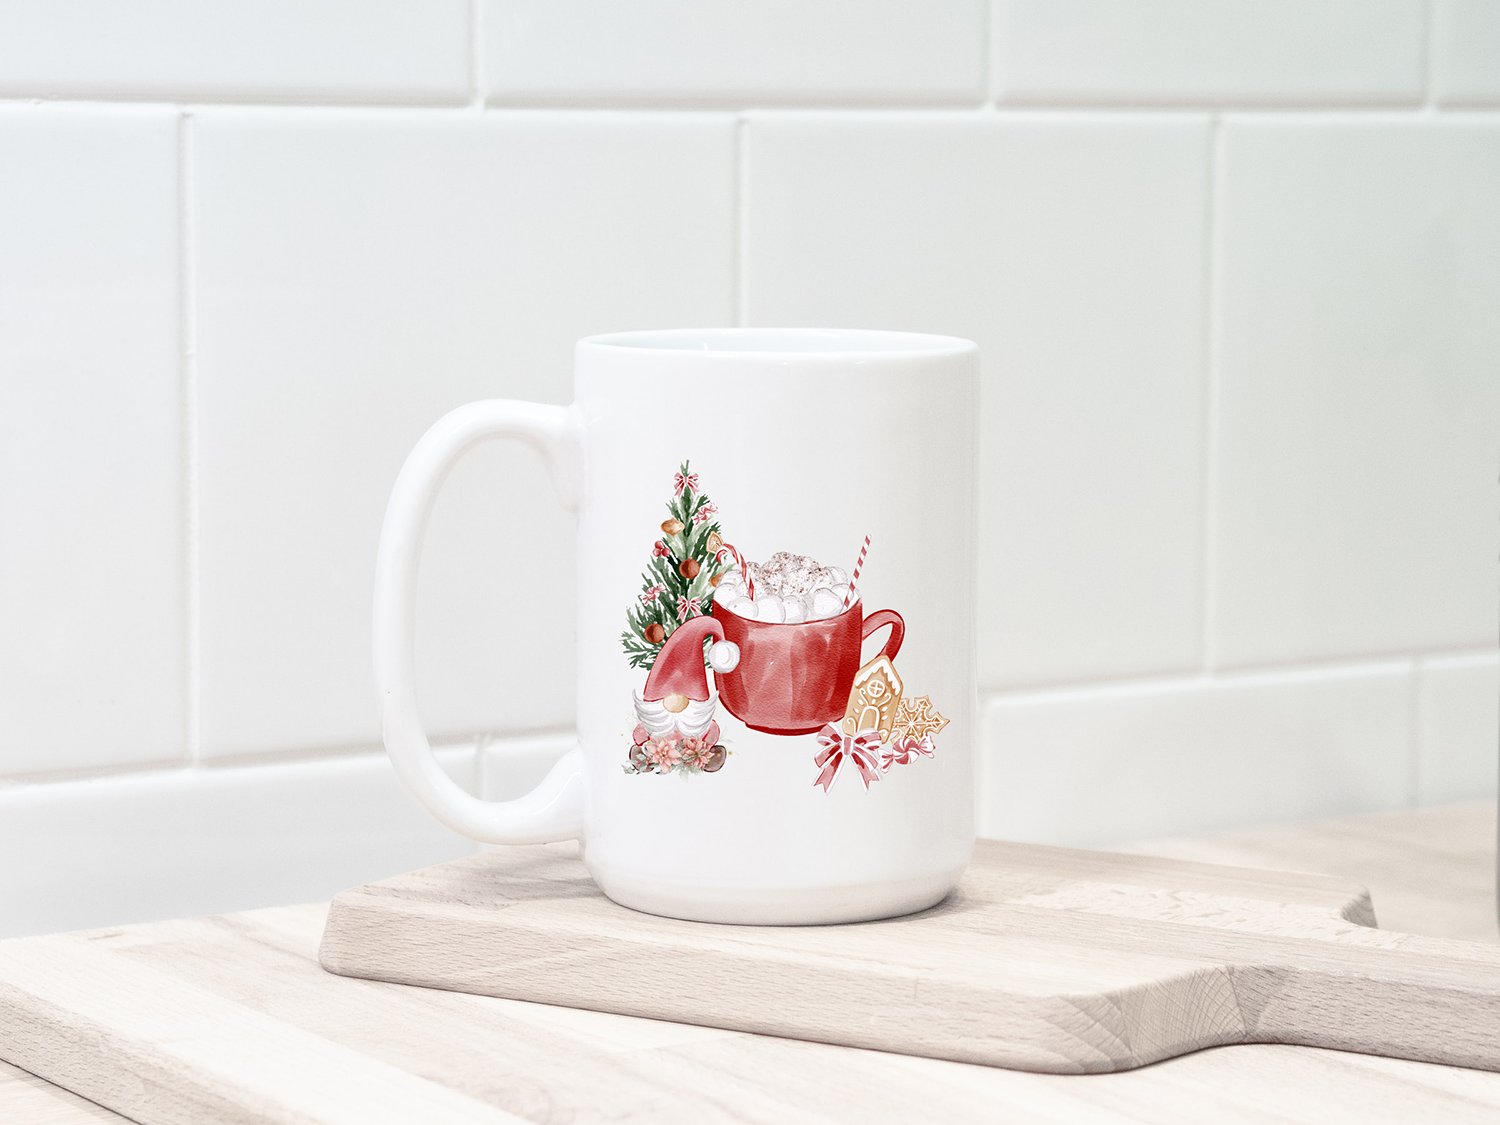 Nice big white cup with the Christmas illustration.